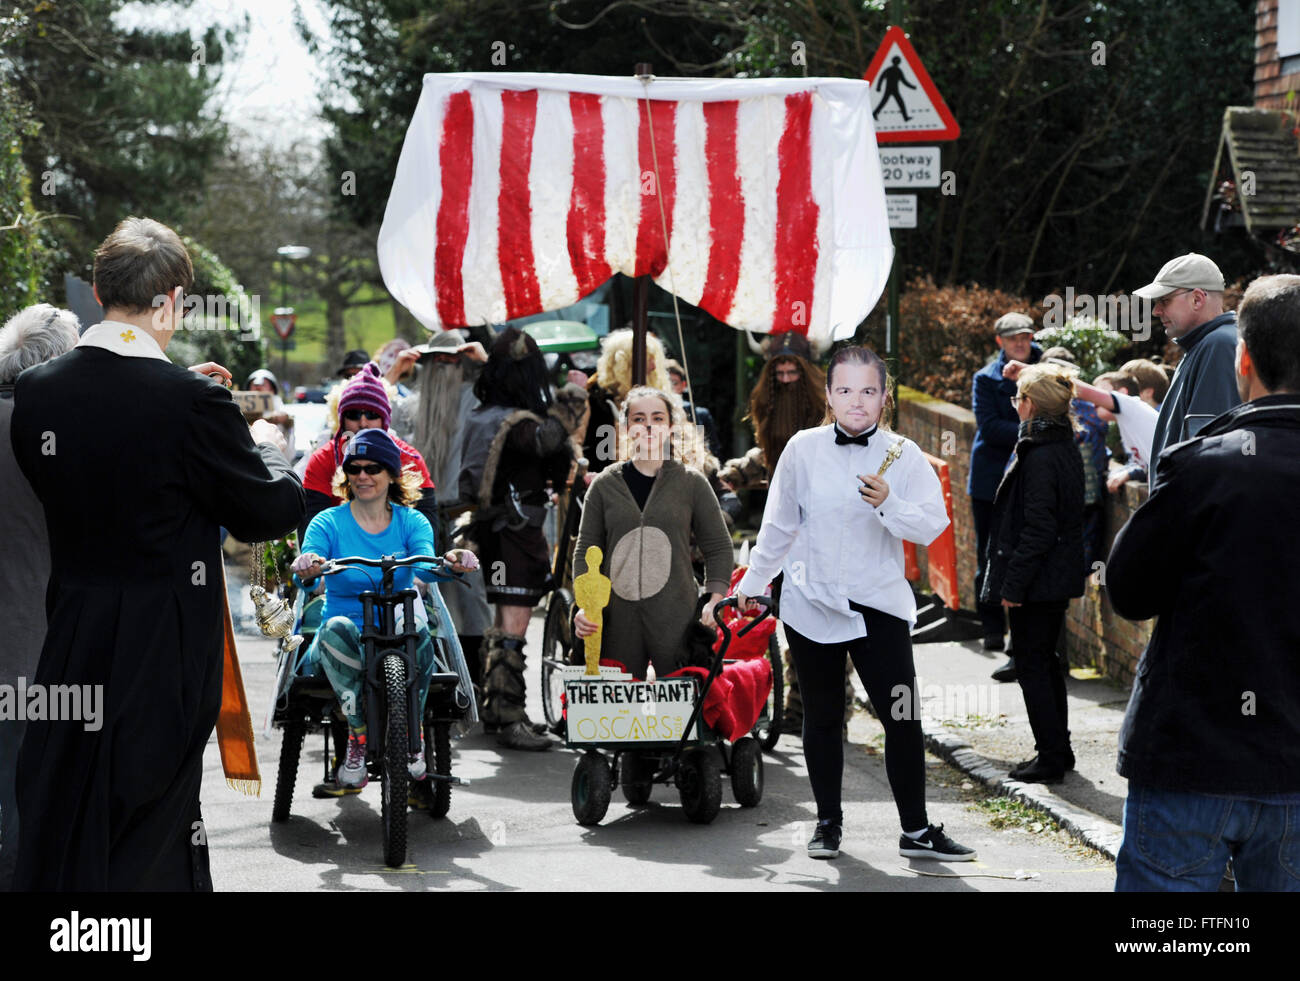 Bolney, Sussex, UK. 28th March, 2016.  Competitors at the start line in the Bolney Pram Races held every year on Easter Bank Holiday Monday . This year they are raising money for Chailey Heritage and the Service by Emergency Rider Services charities  Credit:  Simon Dack/Alamy Live News Stock Photo